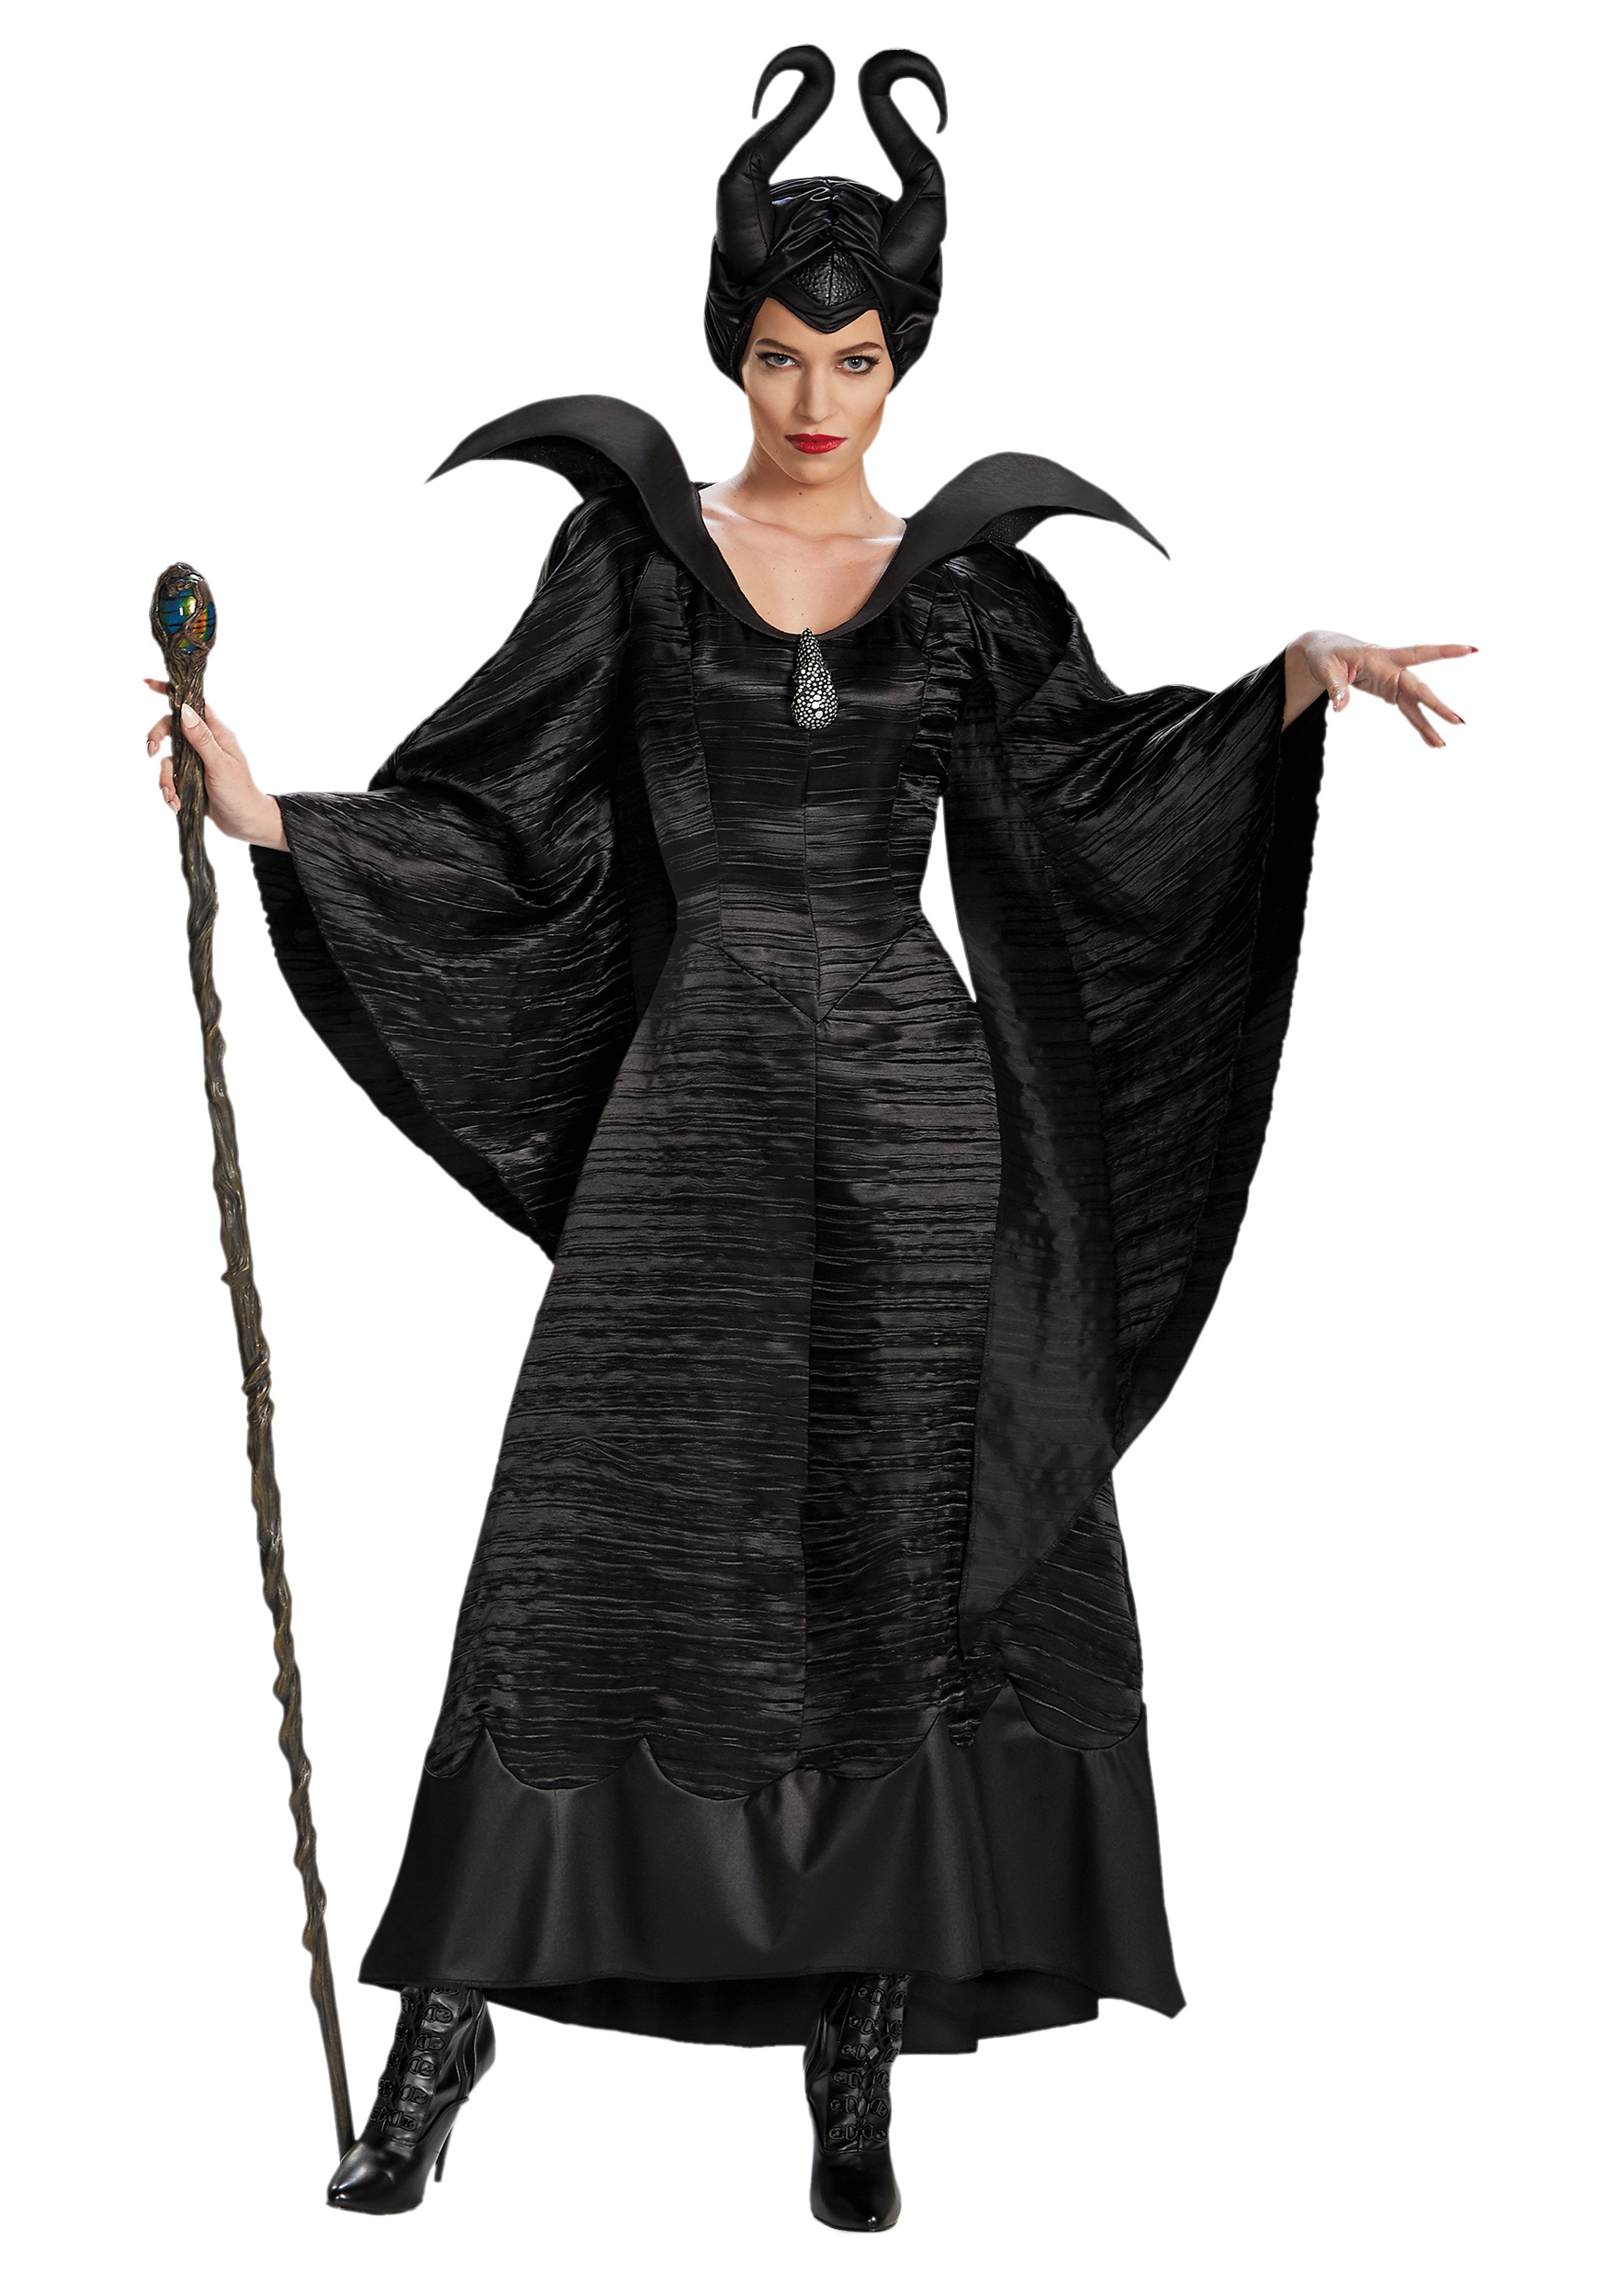 Photos - Fancy Dress Deluxe Disguise Maleficent Christening  Black Gown for Women Black DI71825 